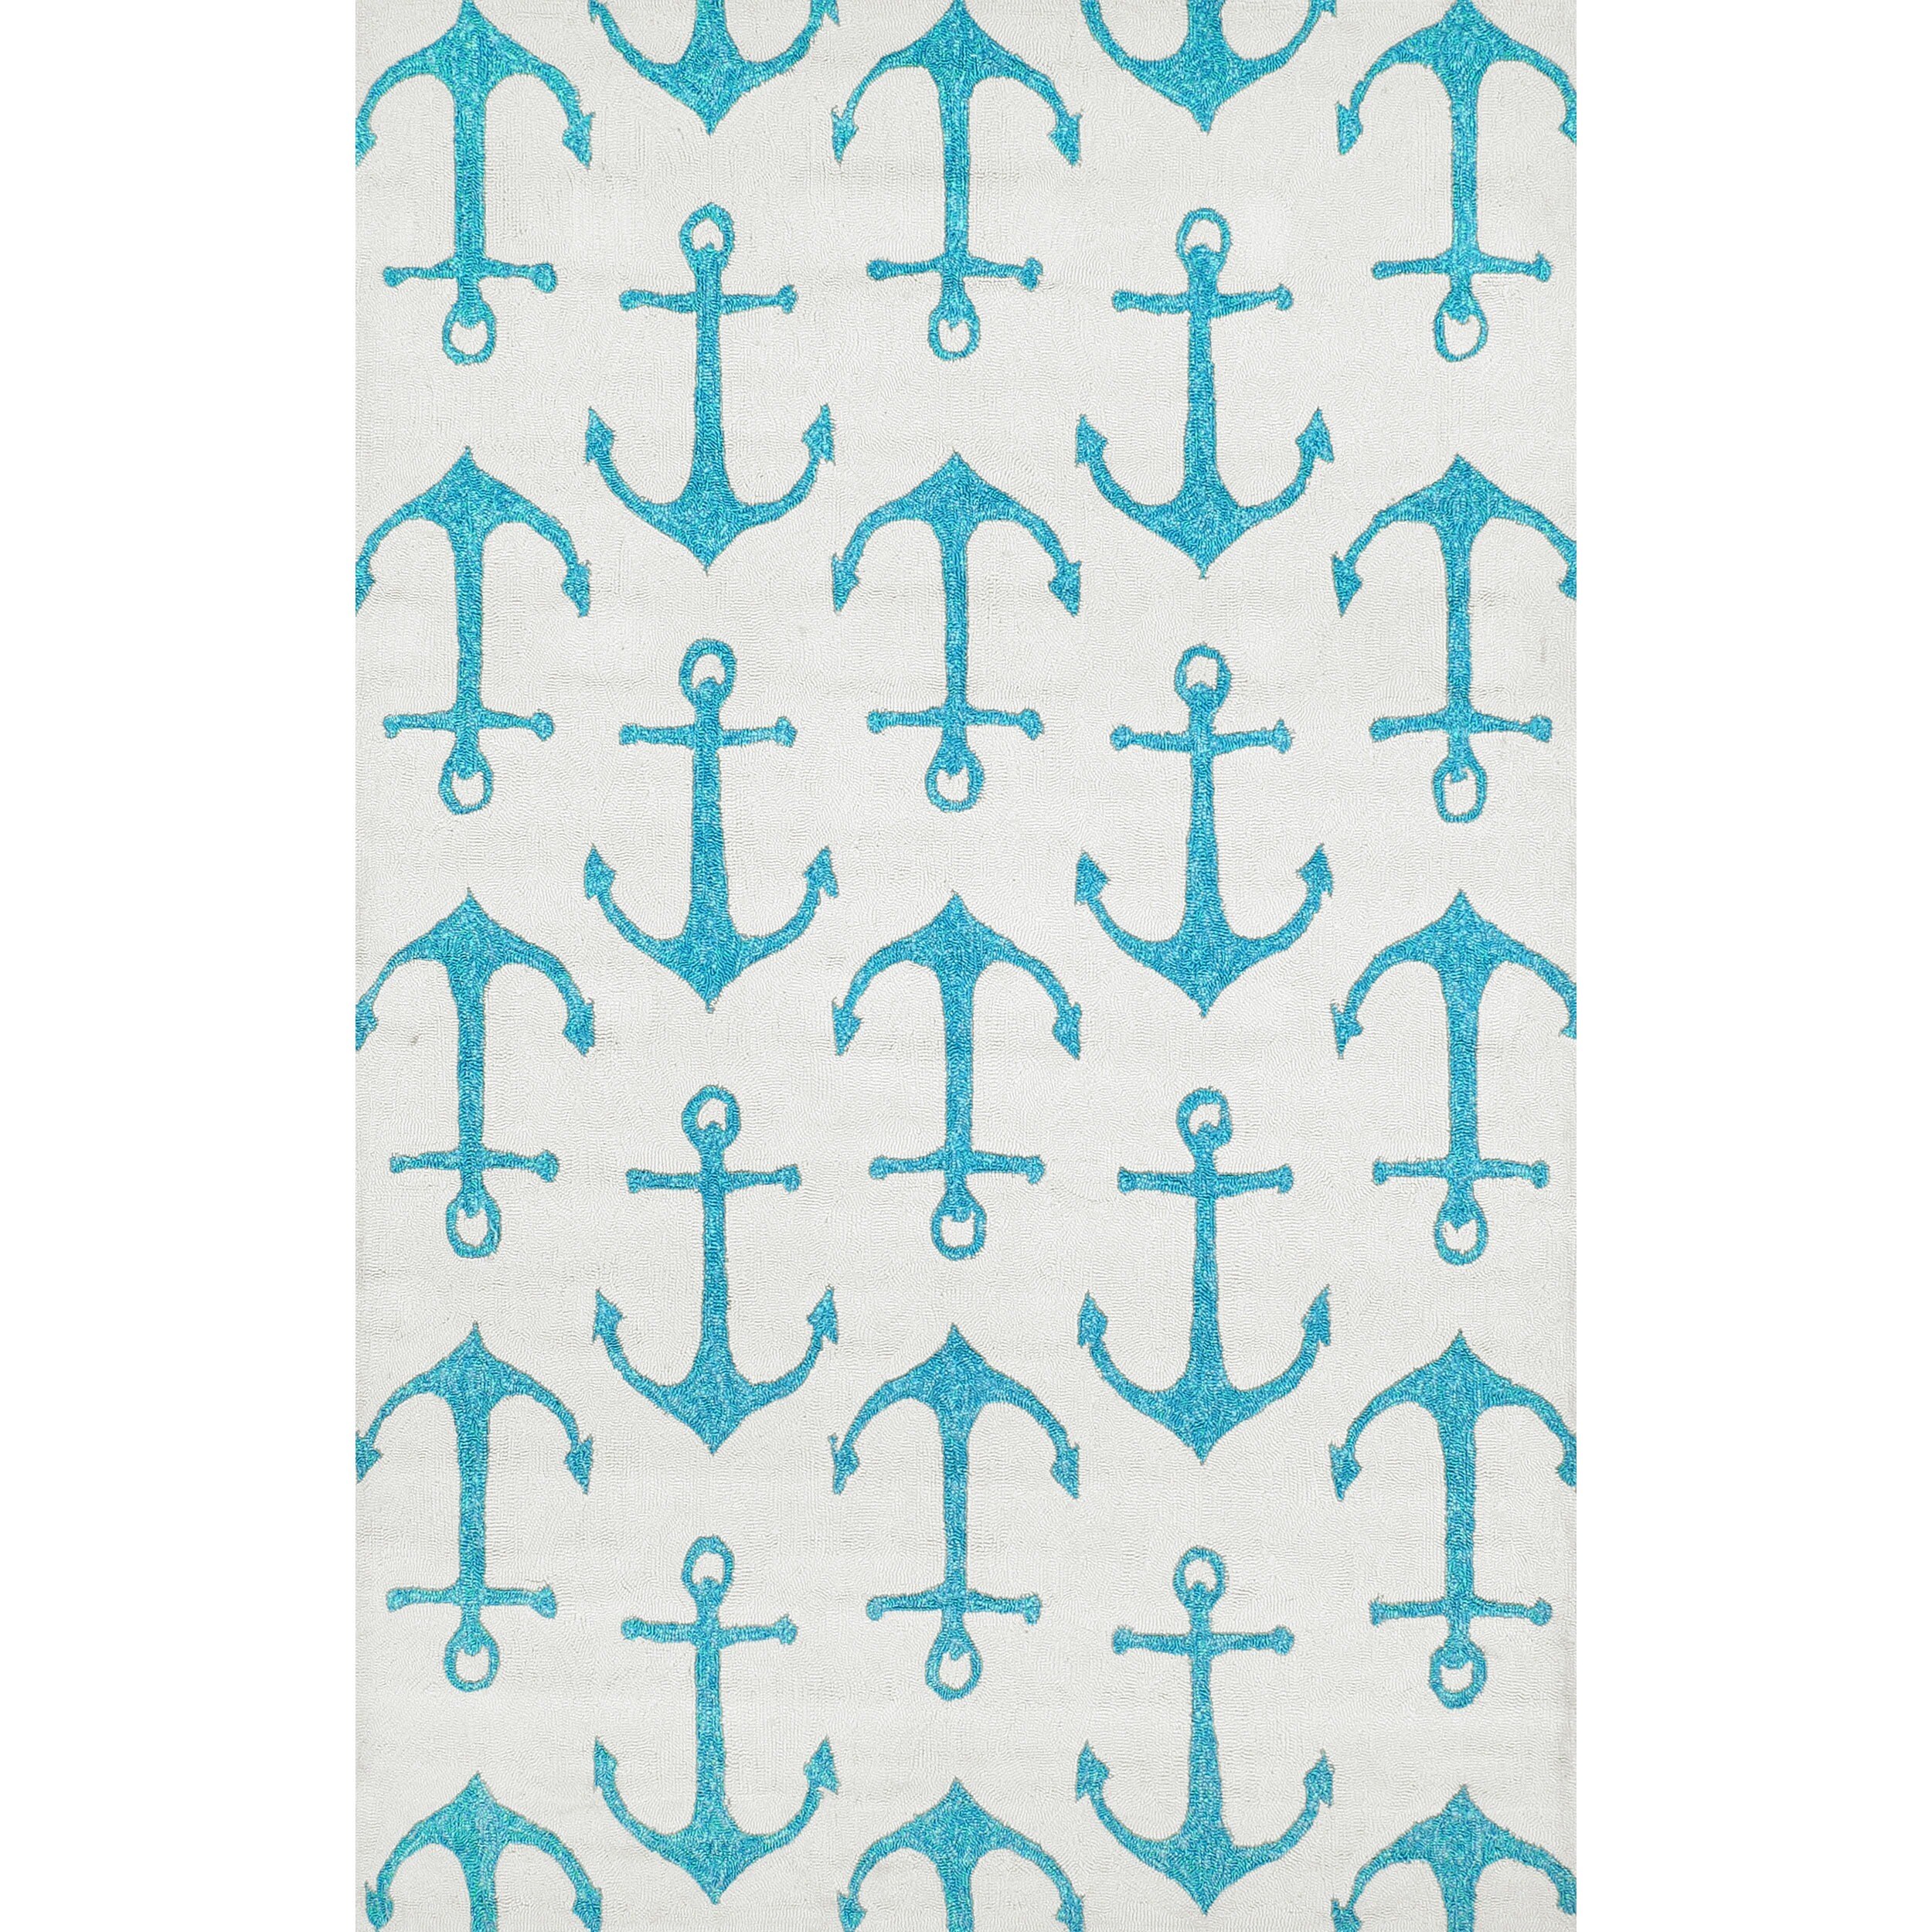 https://ak1.ostkcdn.com/images/products/8500559/nuLOOM-Indoor-Outdoor-Novelty-Nautical-Anchors-White-Rug-5-x-8-b531bbf6-693f-47d7-a2ad-f07e54e17224.jpg